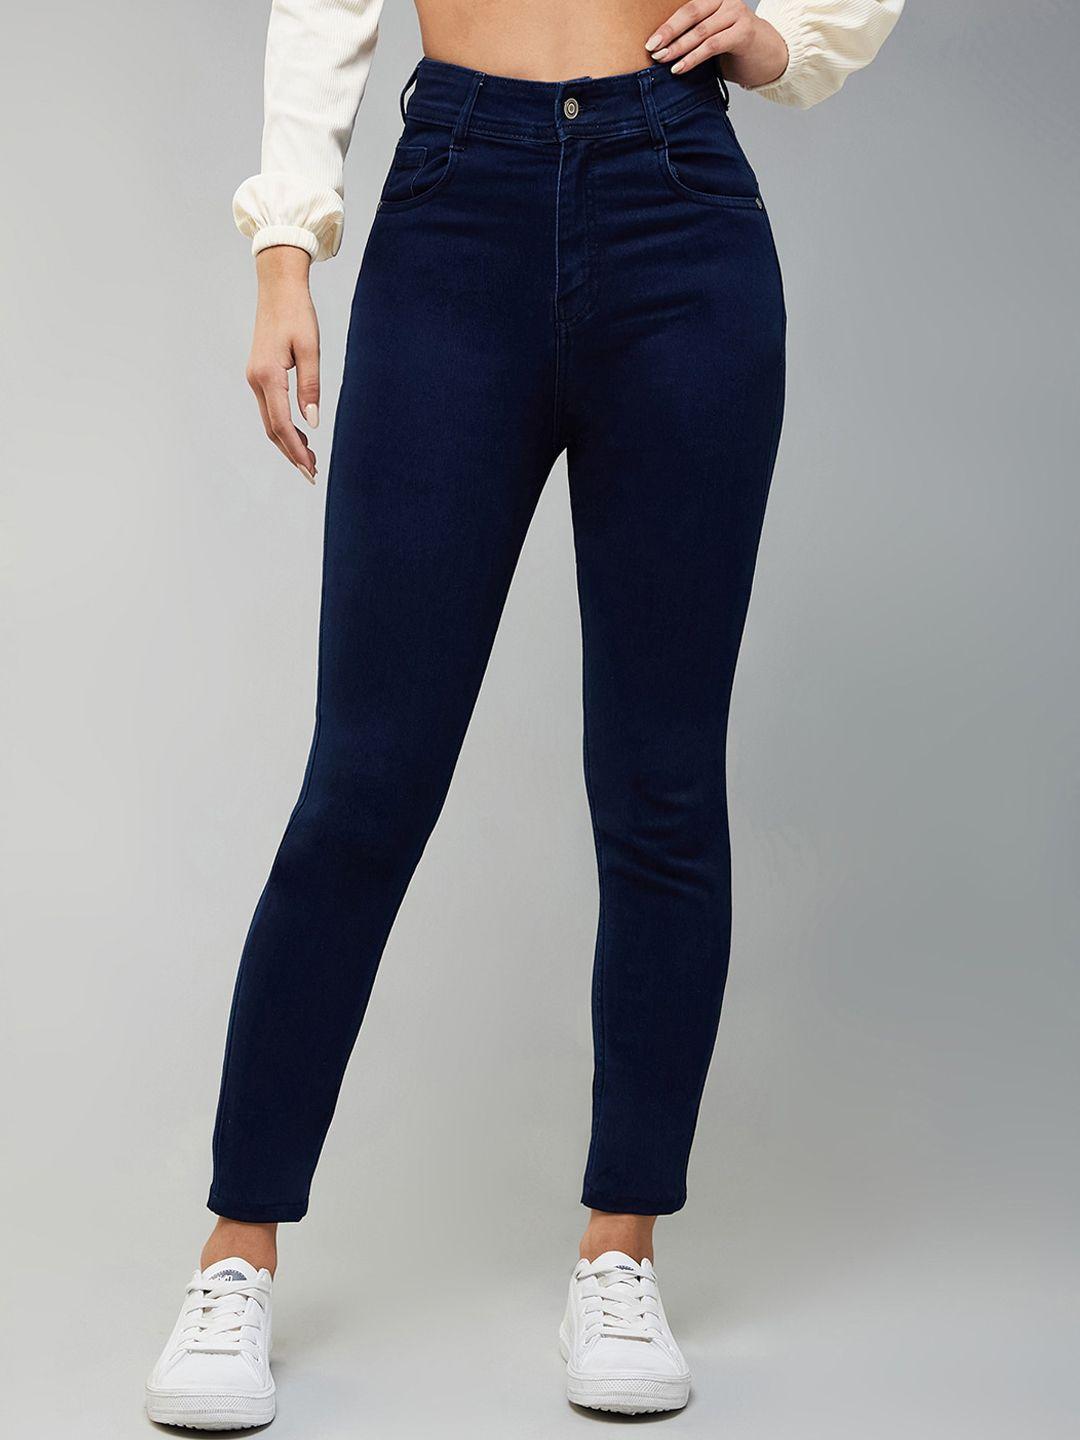 dolce crudo women navy blue skinny fit high-rise stretchable jeans